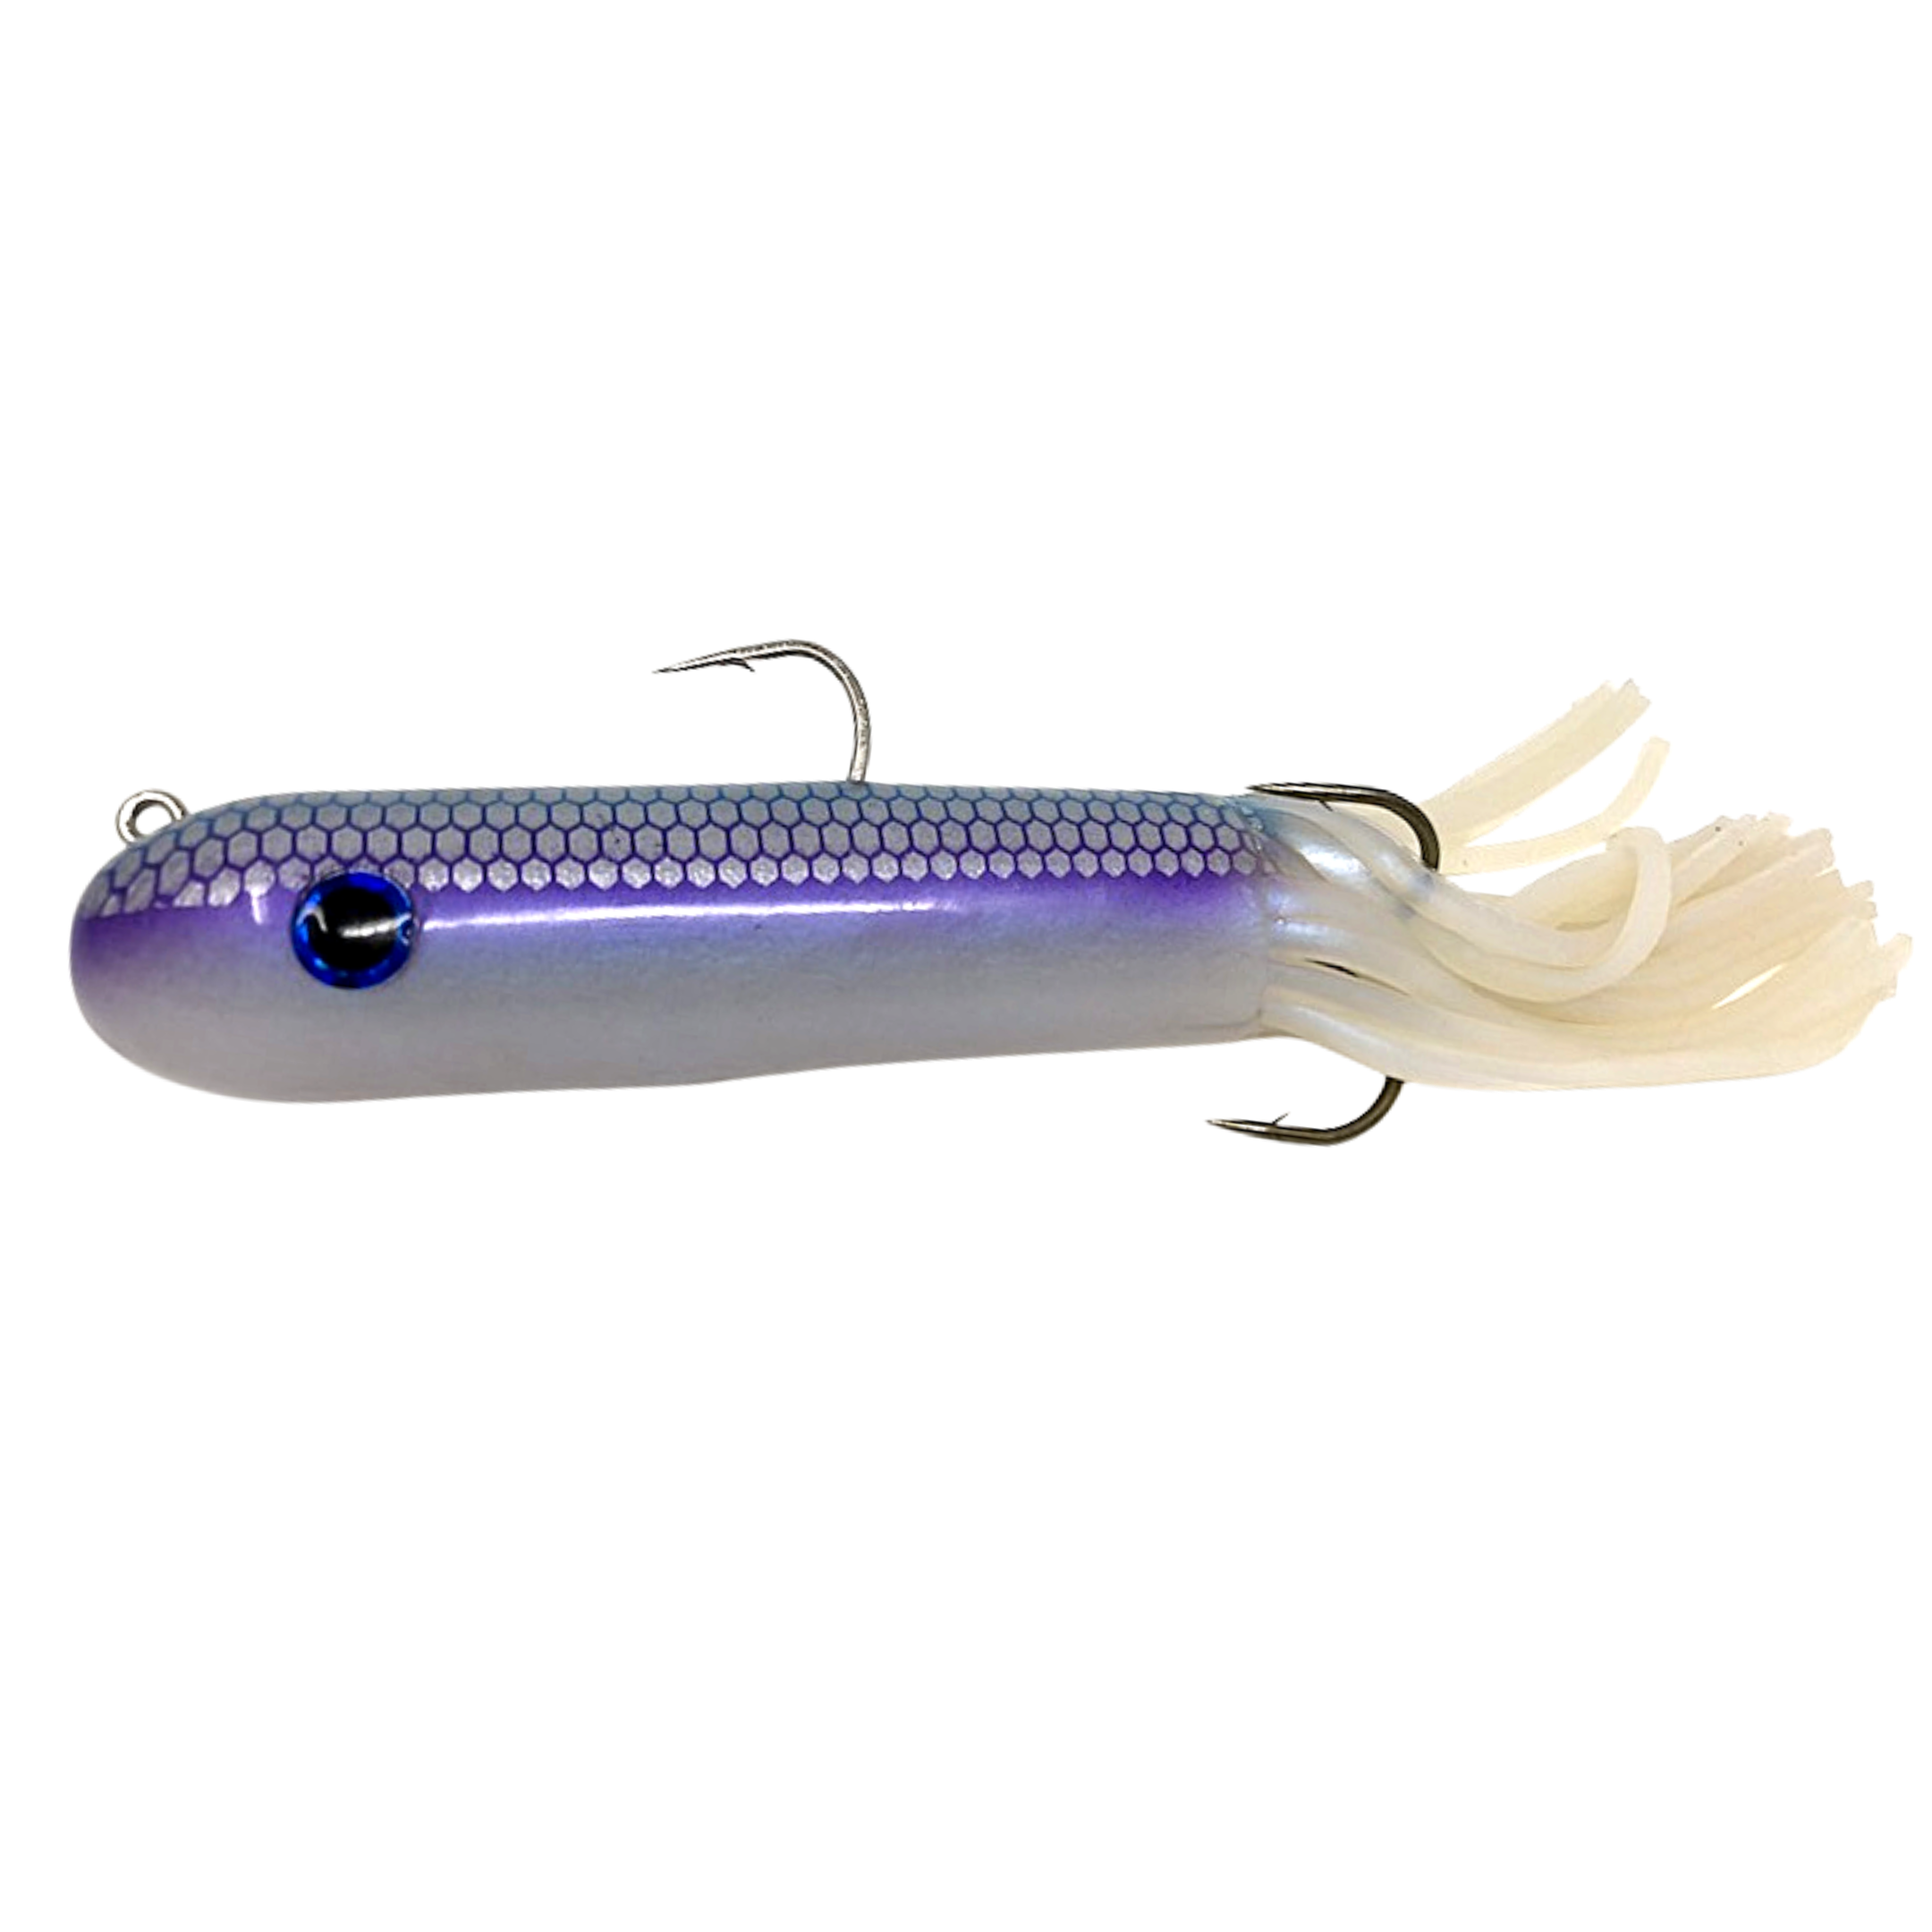 MuskieFIRST  Contact for Rat-Man Lures? » Lures,Tackle, and Equipment » Muskie  Fishing